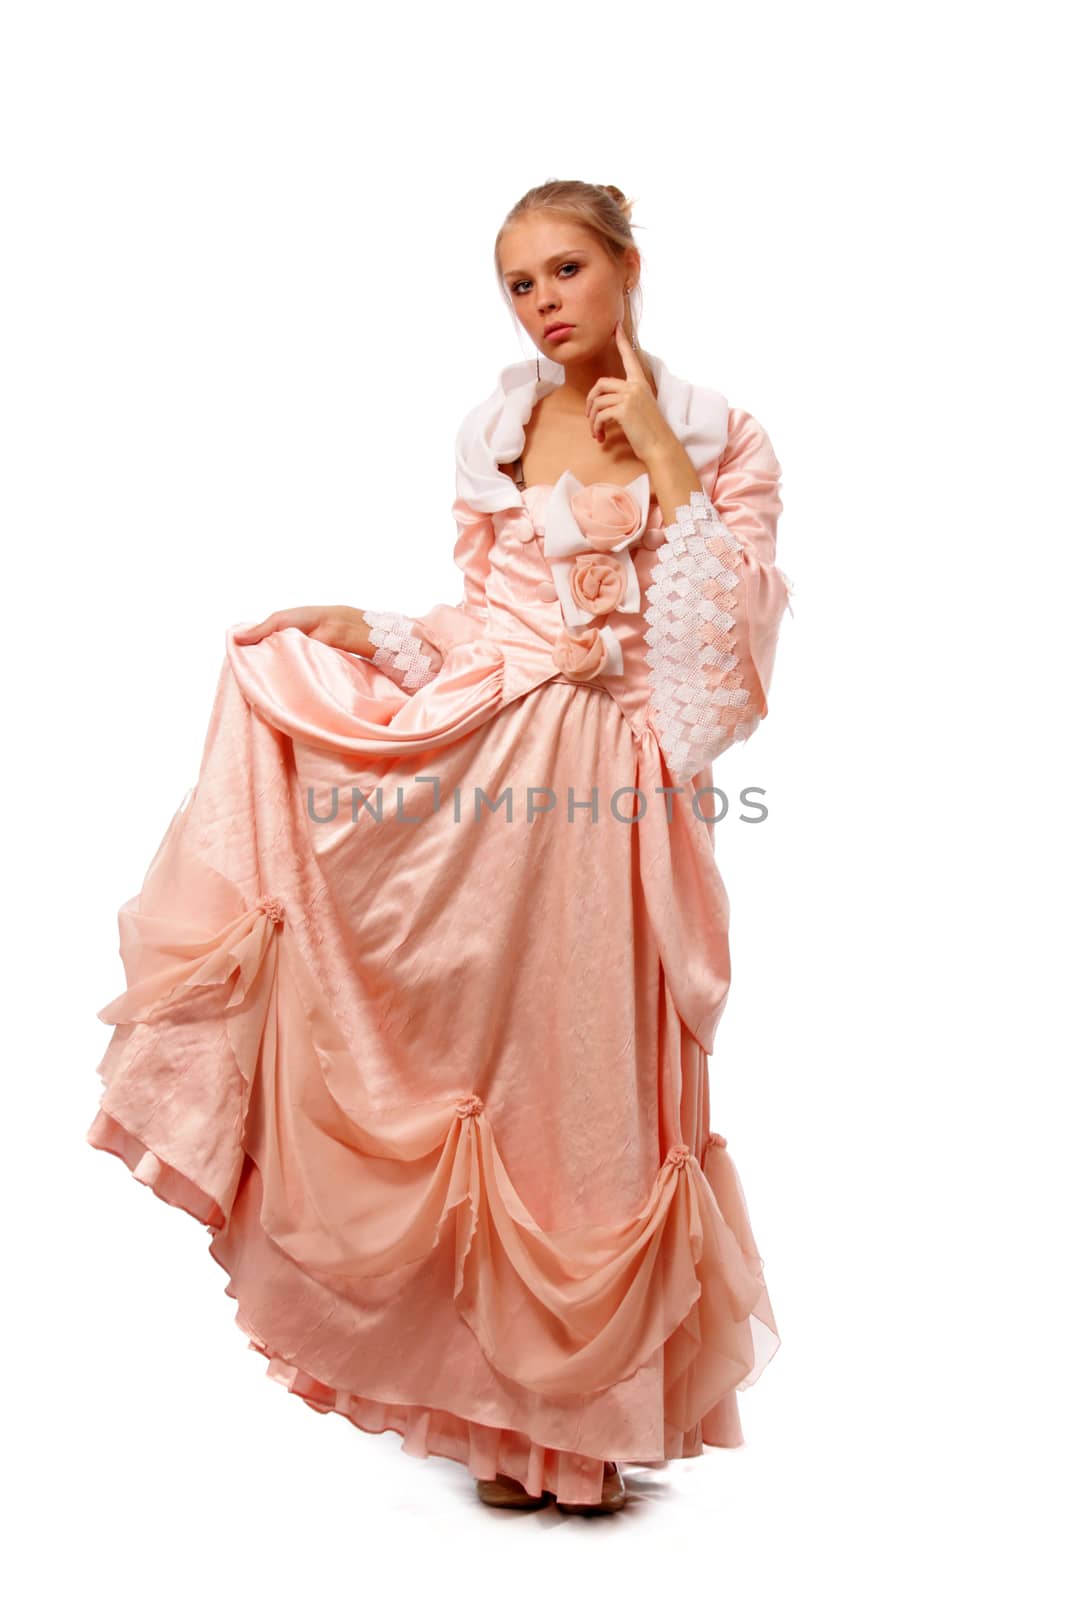 Beautiful young lady in pink gown by andersonrise